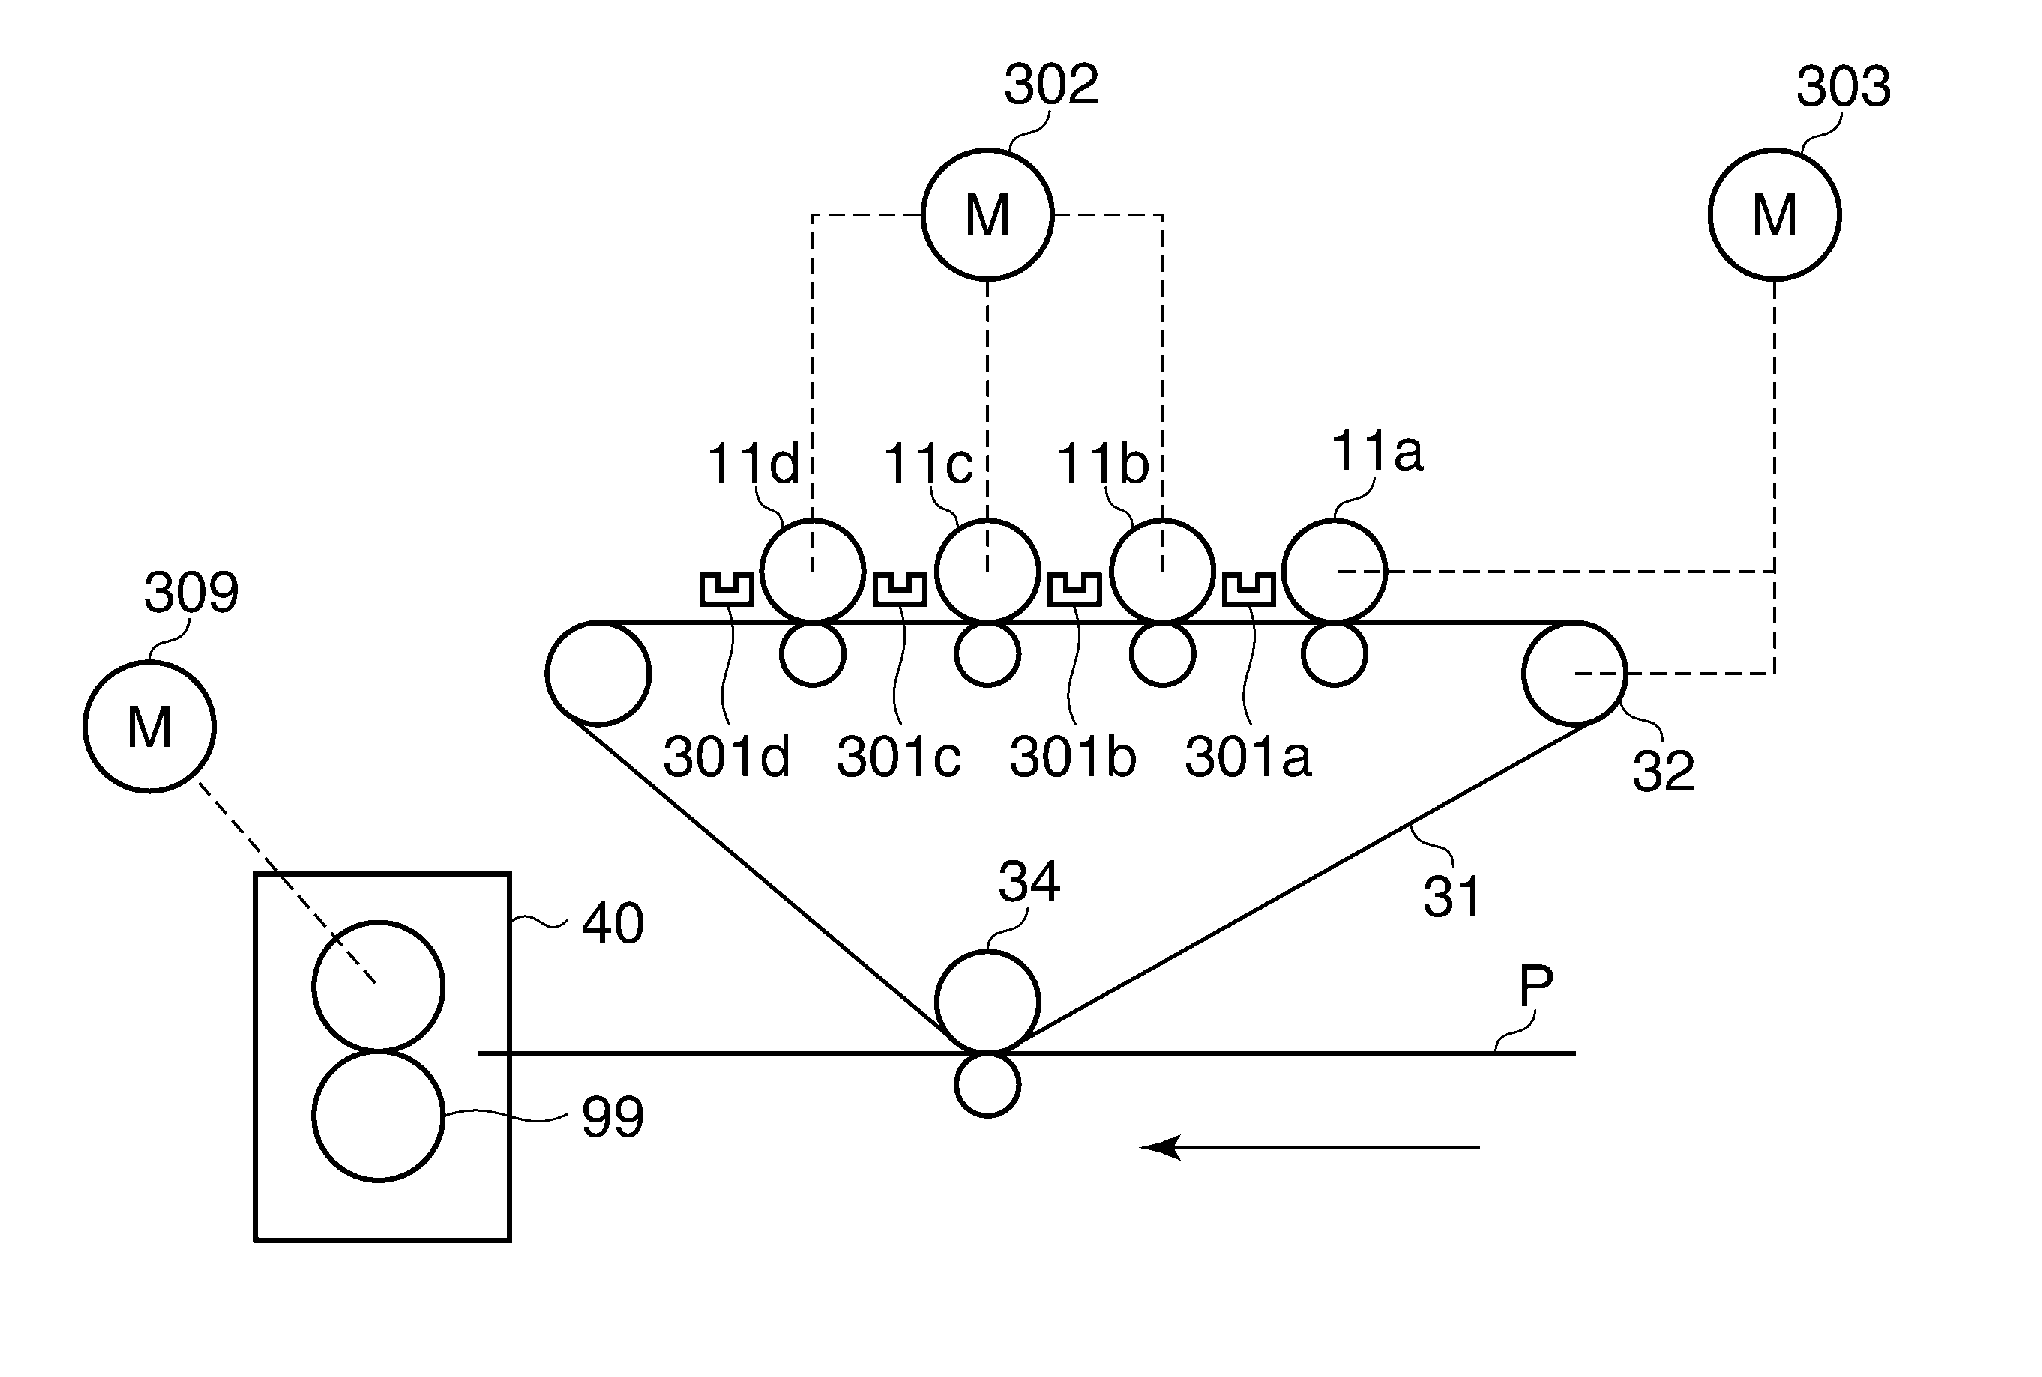 Image forming apparatus using electrophotographic process